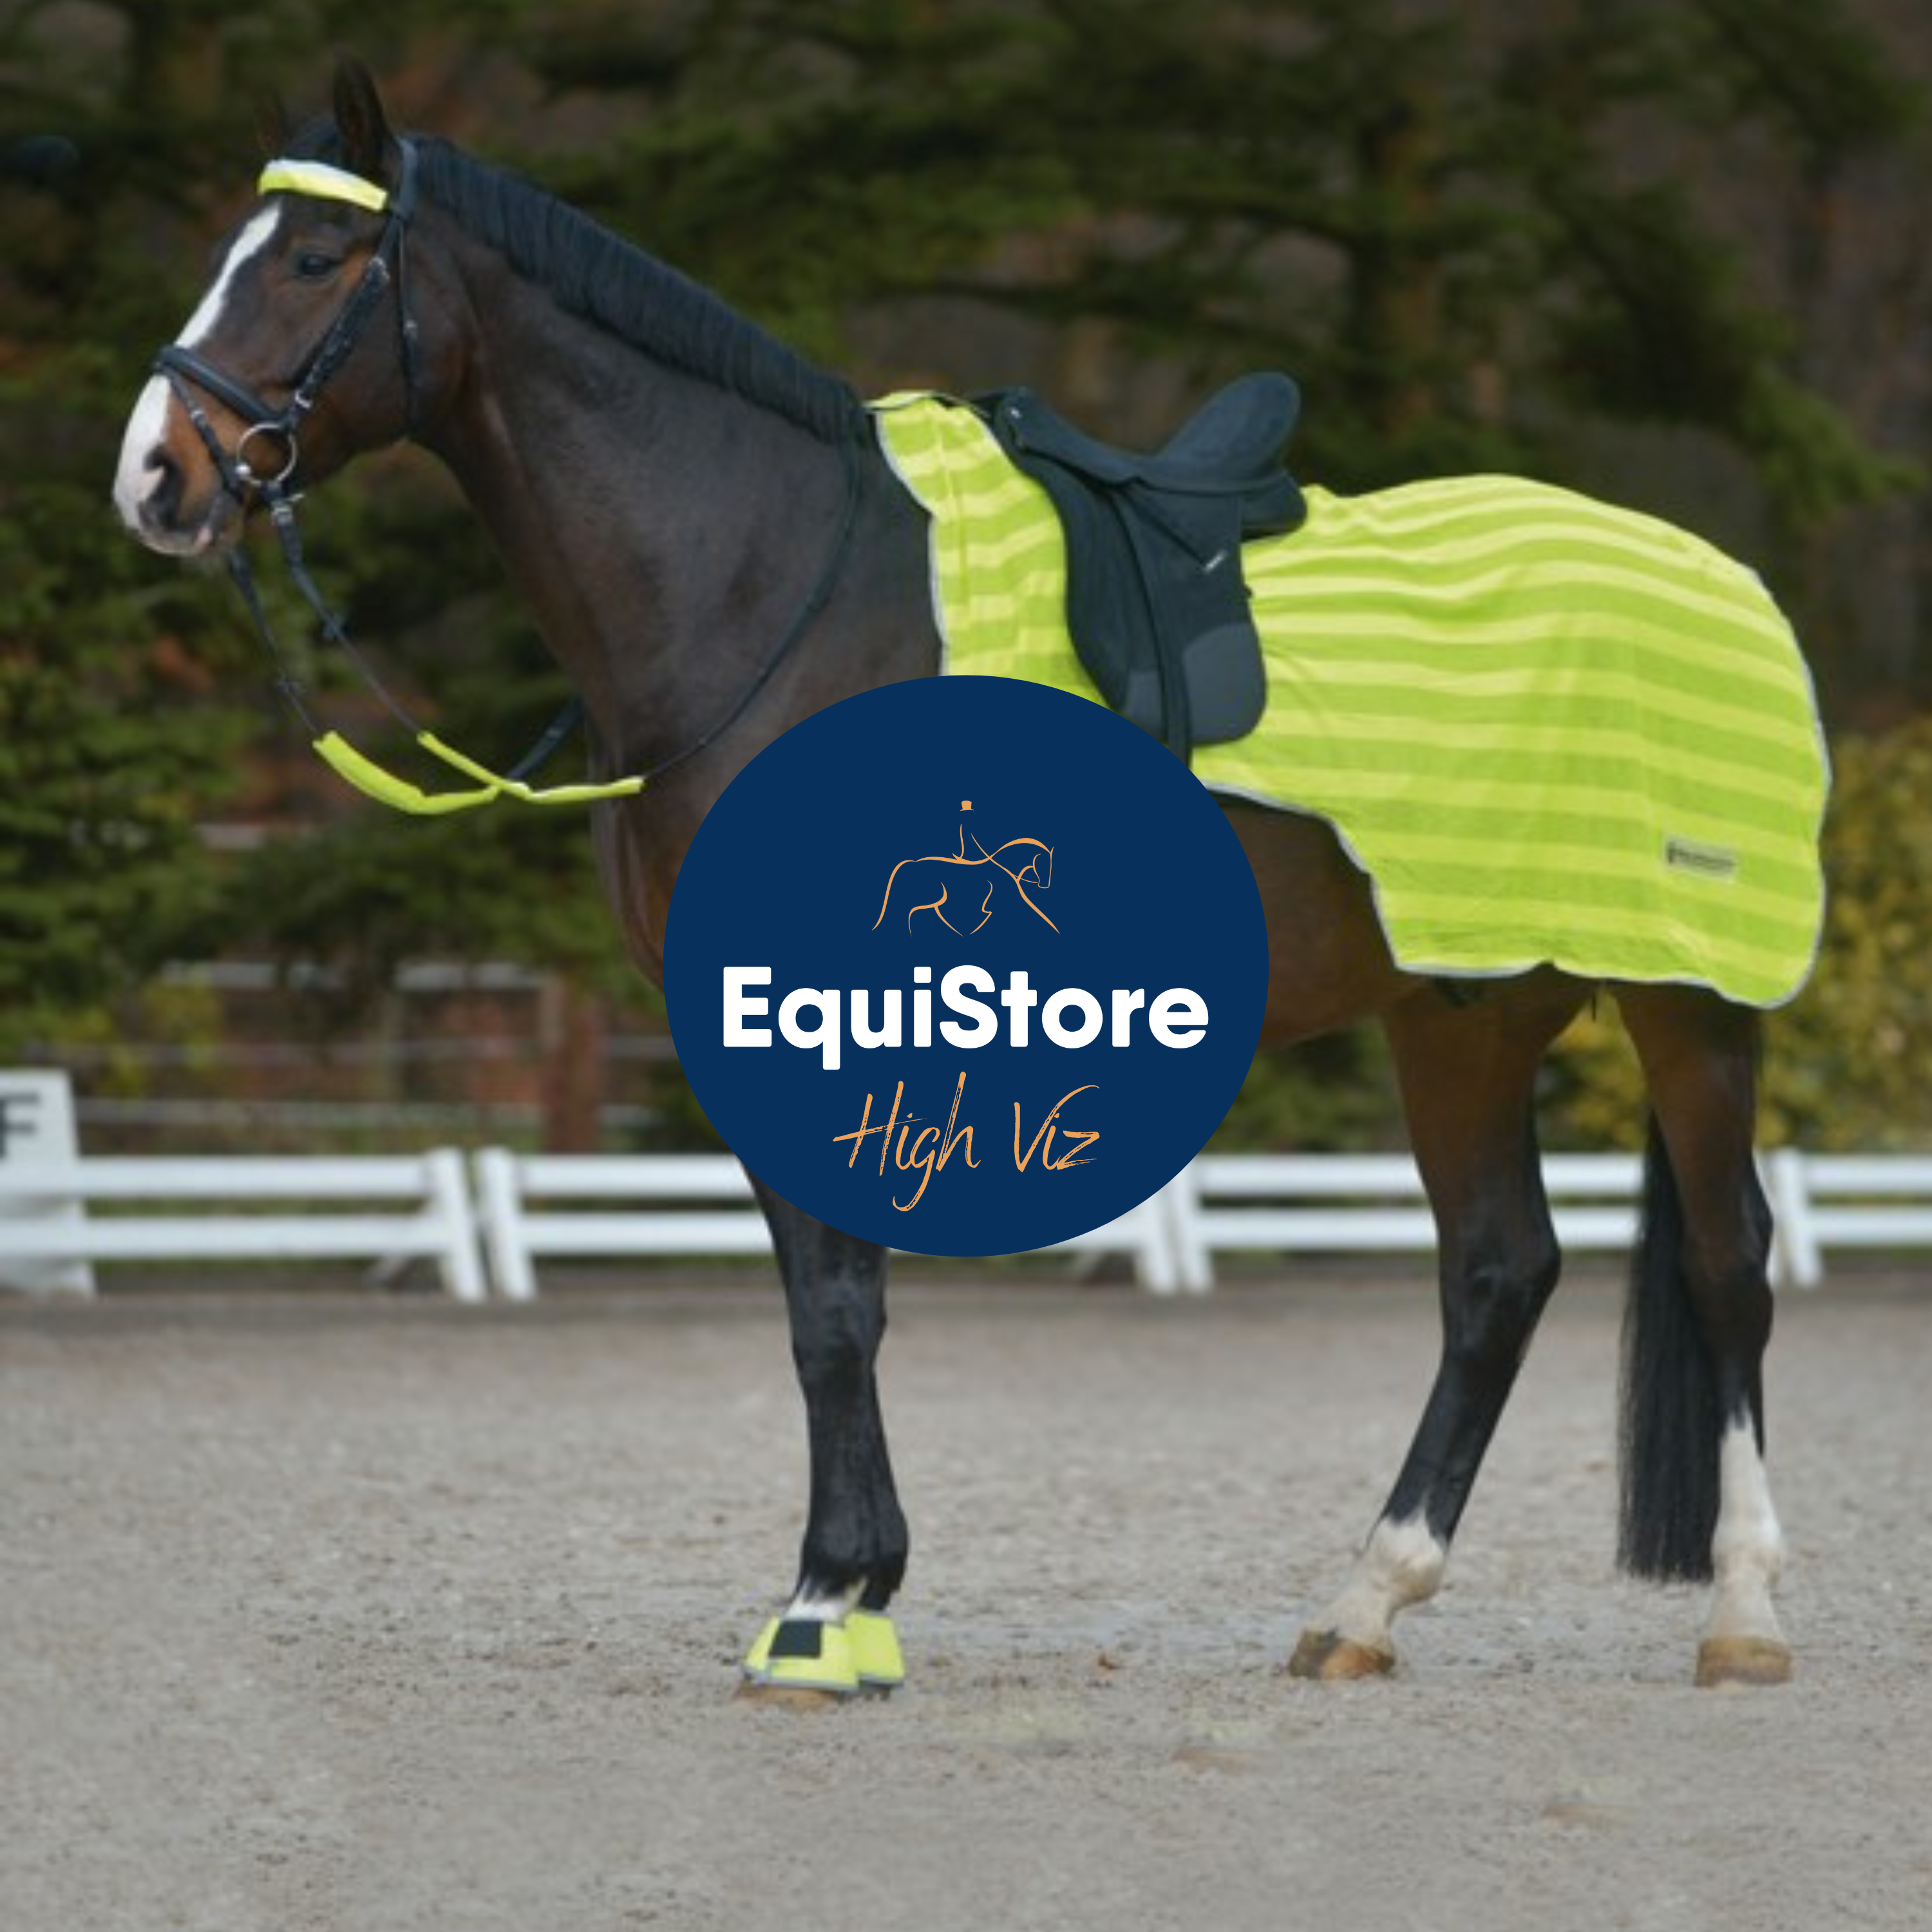 A great selection of high visibility, reflective neon or high viz products for horse riders and horses, available in Ireland at Equistore. 